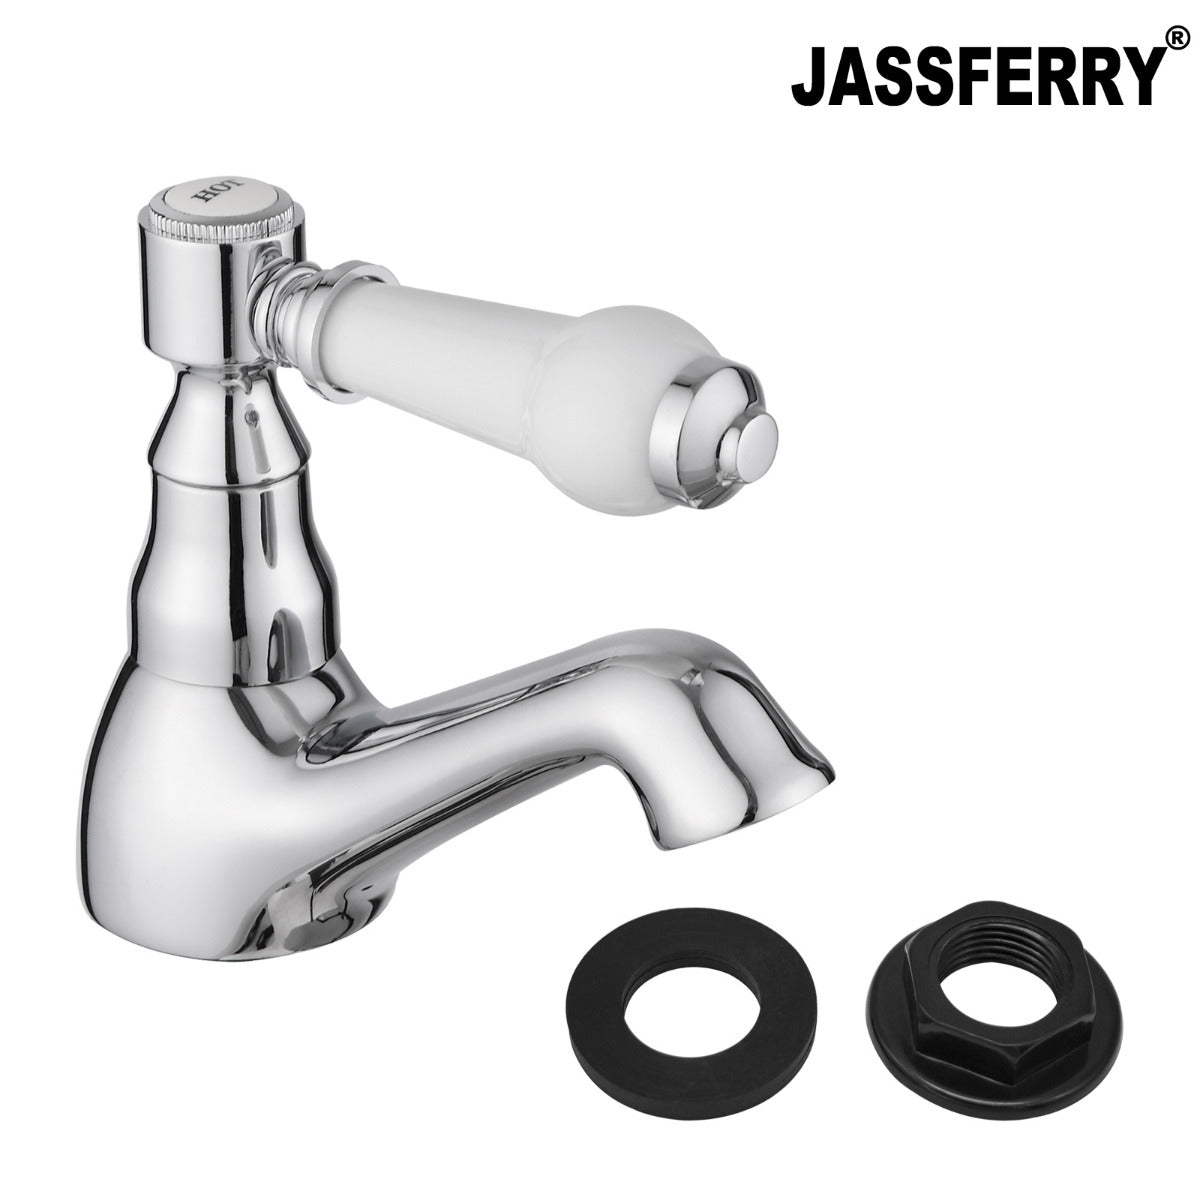 JassferryJASSFERRY Pair of Basin Taps Hot and Cold Water Bathroom 1/4 Turn Ceramic HandleBasin Taps